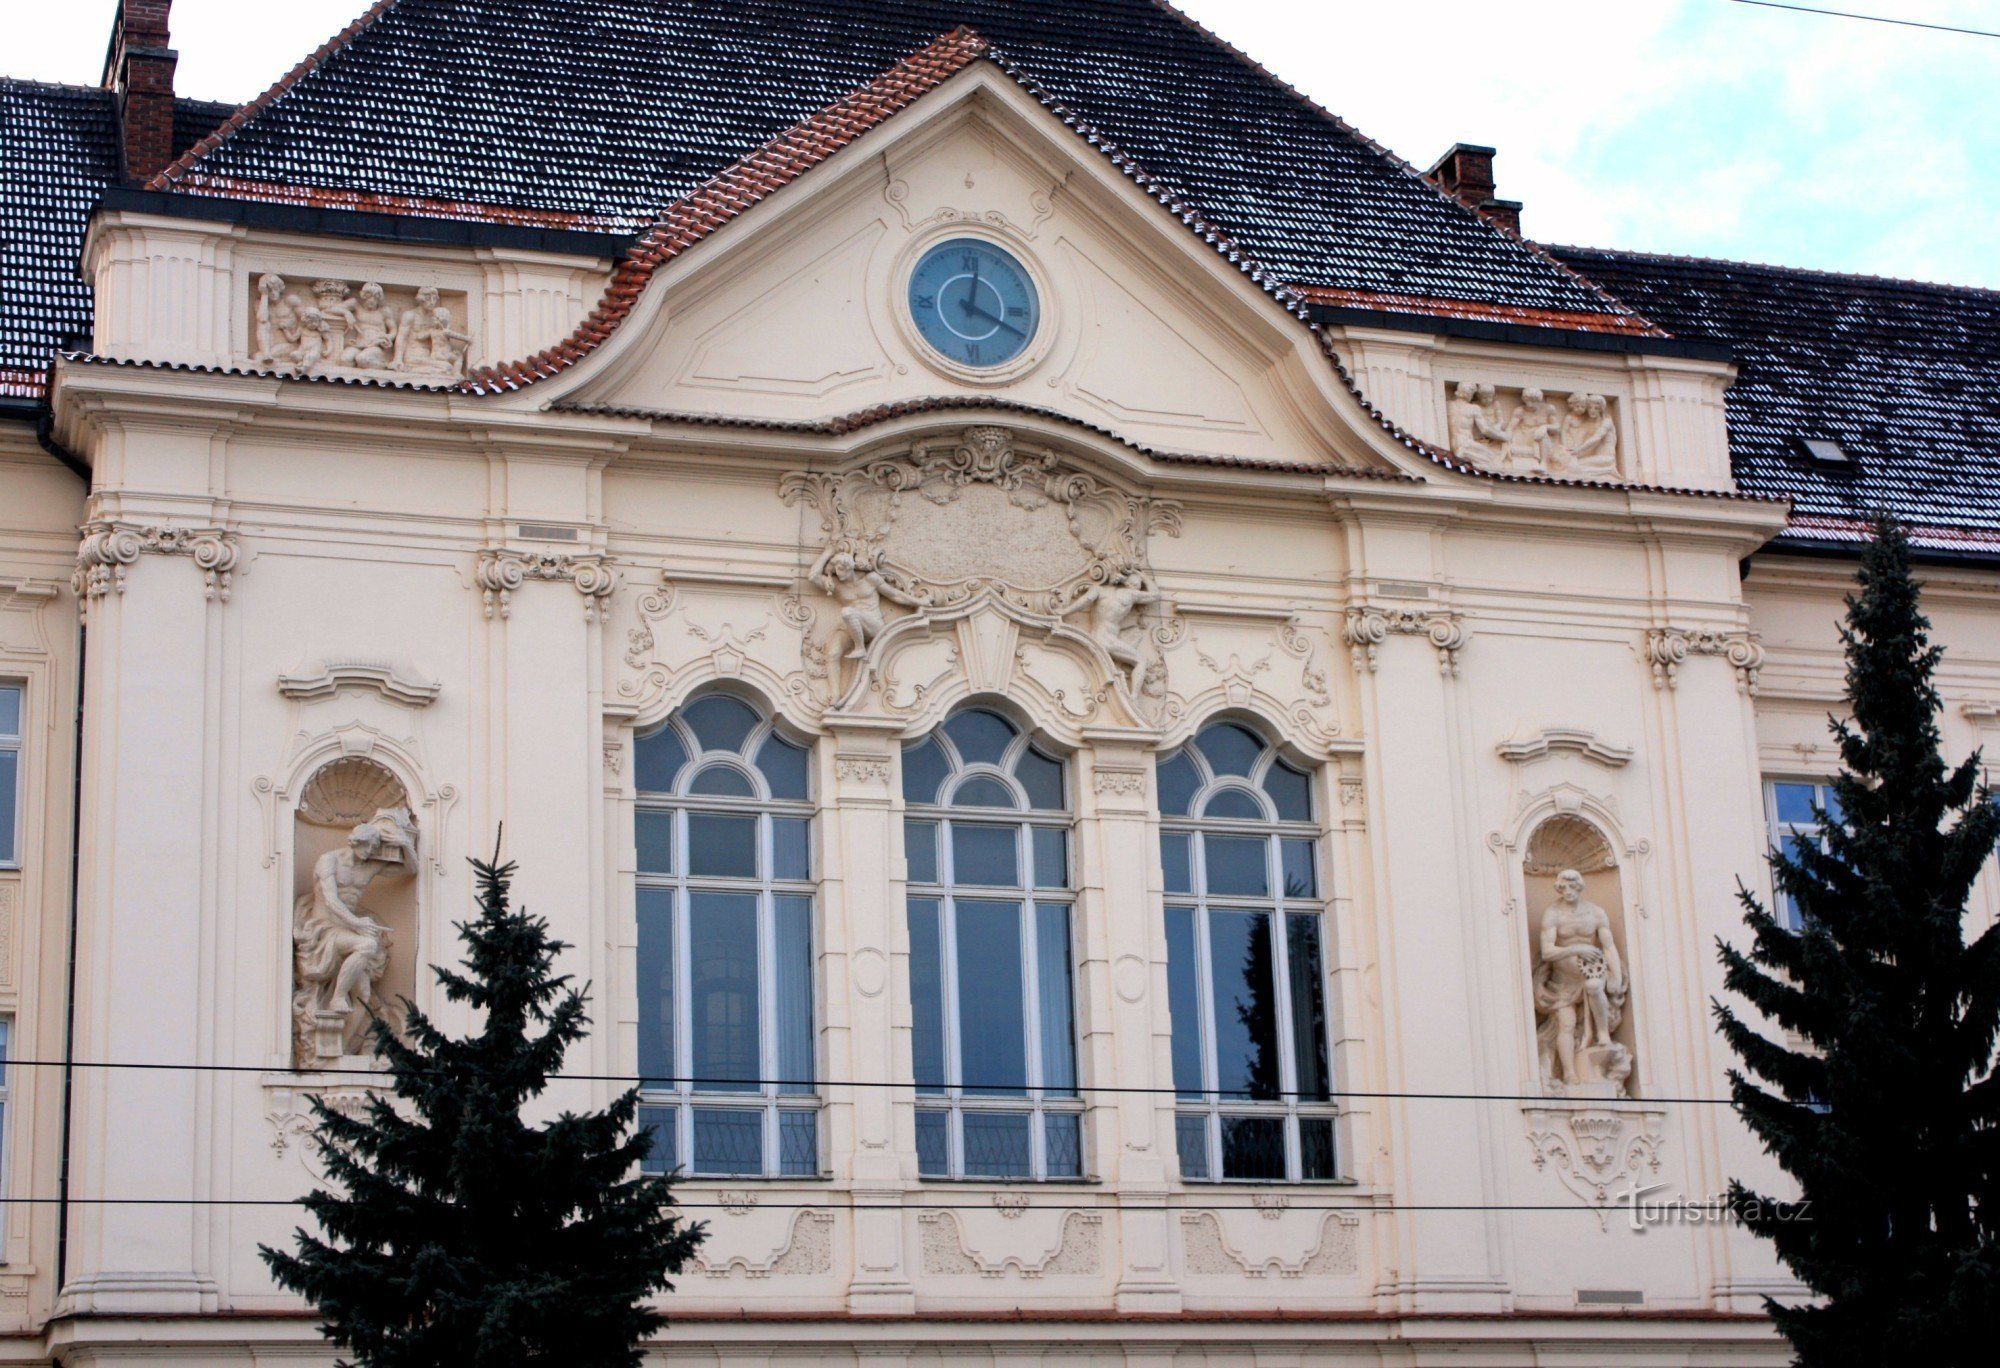 Detail of the entrance facade with a clock